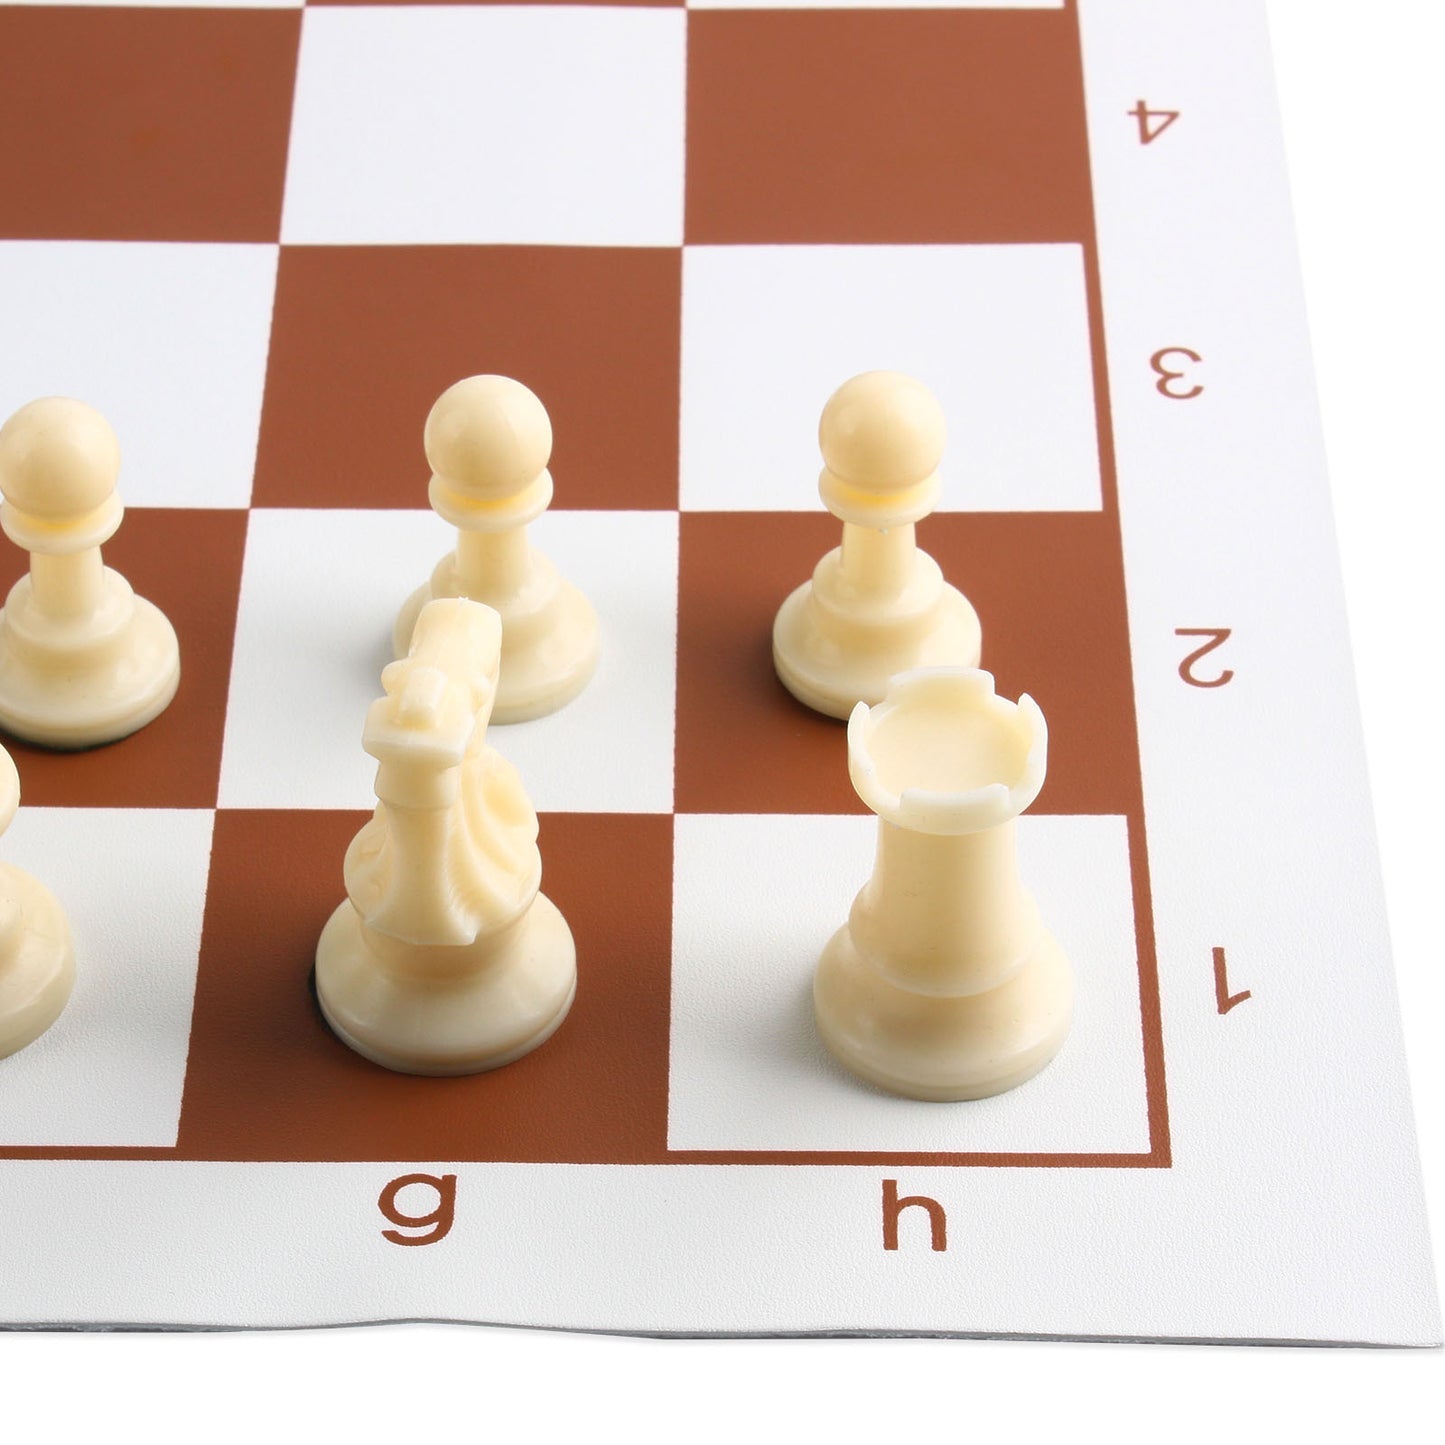 Andux Chess Pieces and Rollable Board QPXQ-01 (Brown,42x42cm)